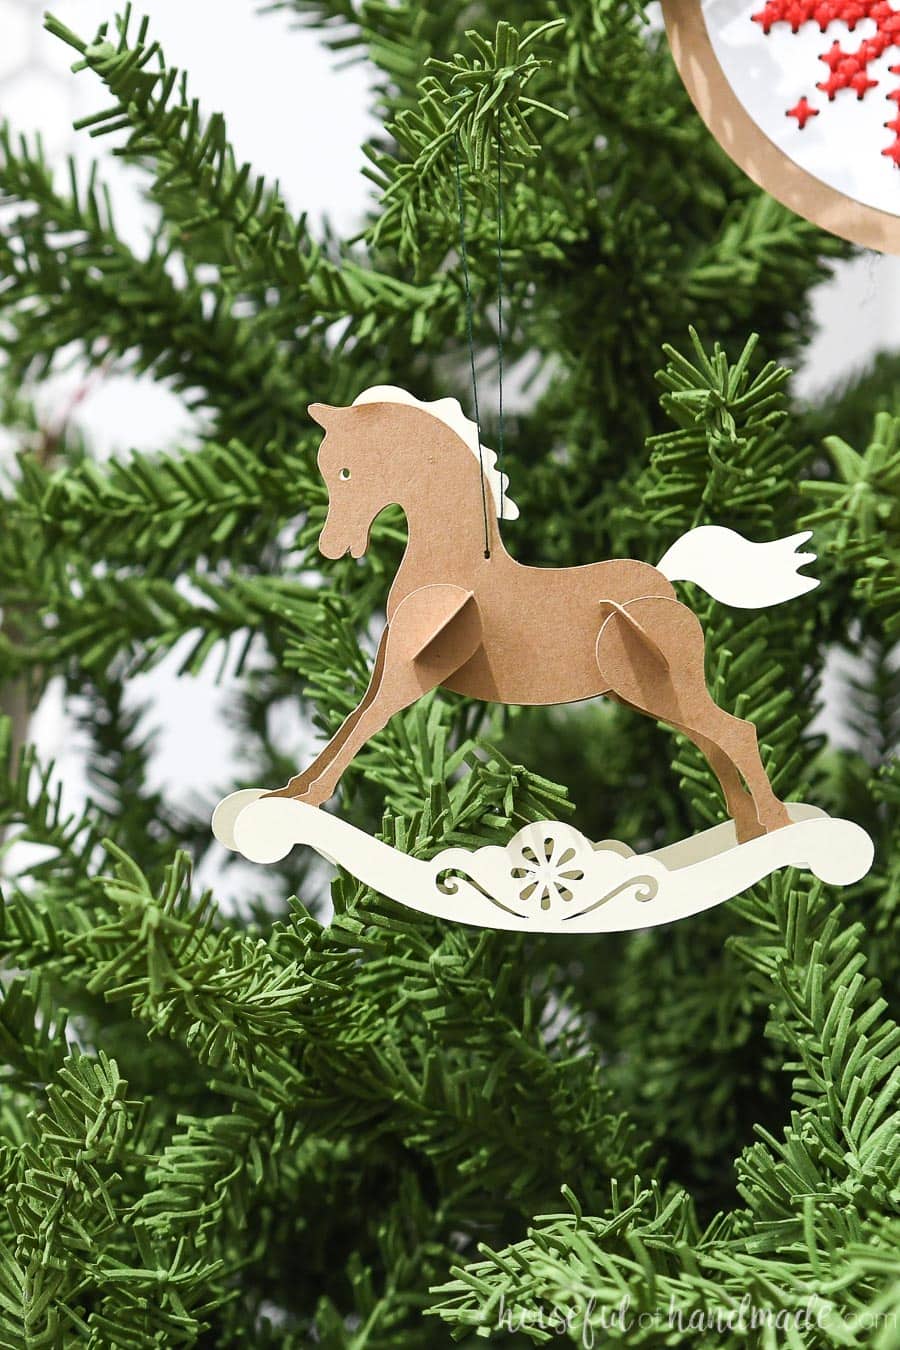 7 Days of Paper Christmas Decor: Rocking Horse Christmas Ornaments